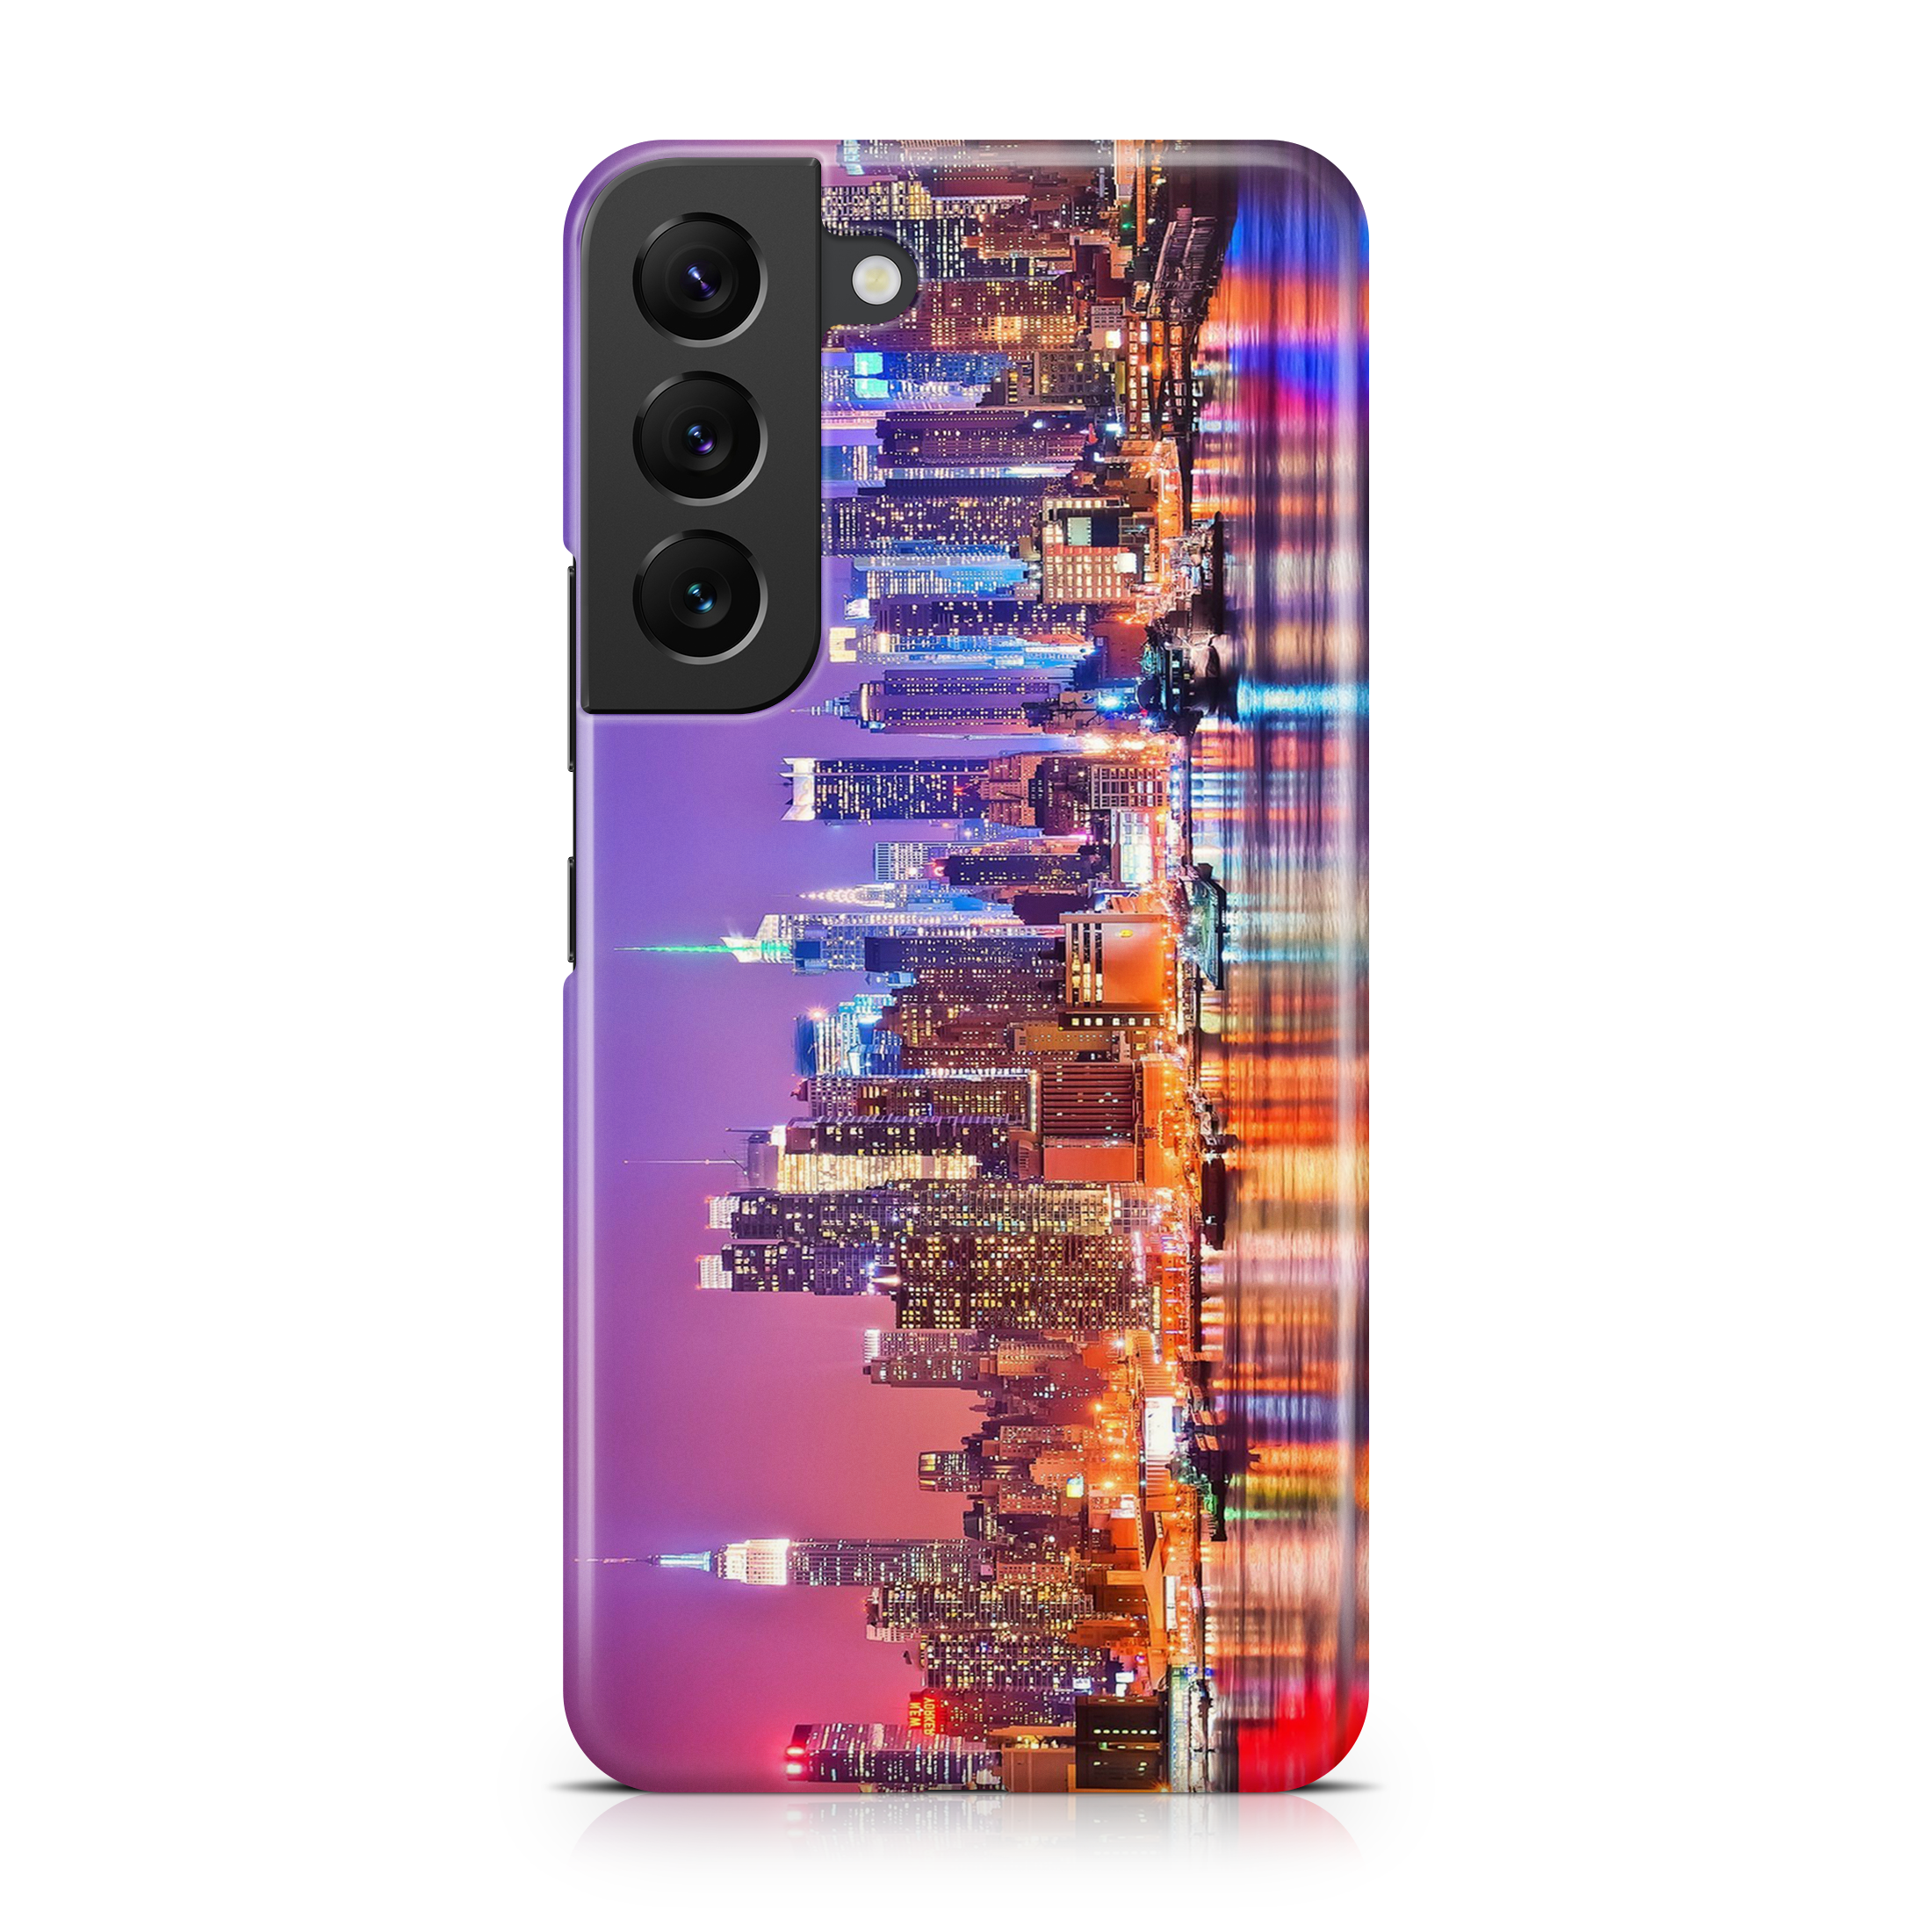 New York City - Samsung phone case designs by CaseSwagger